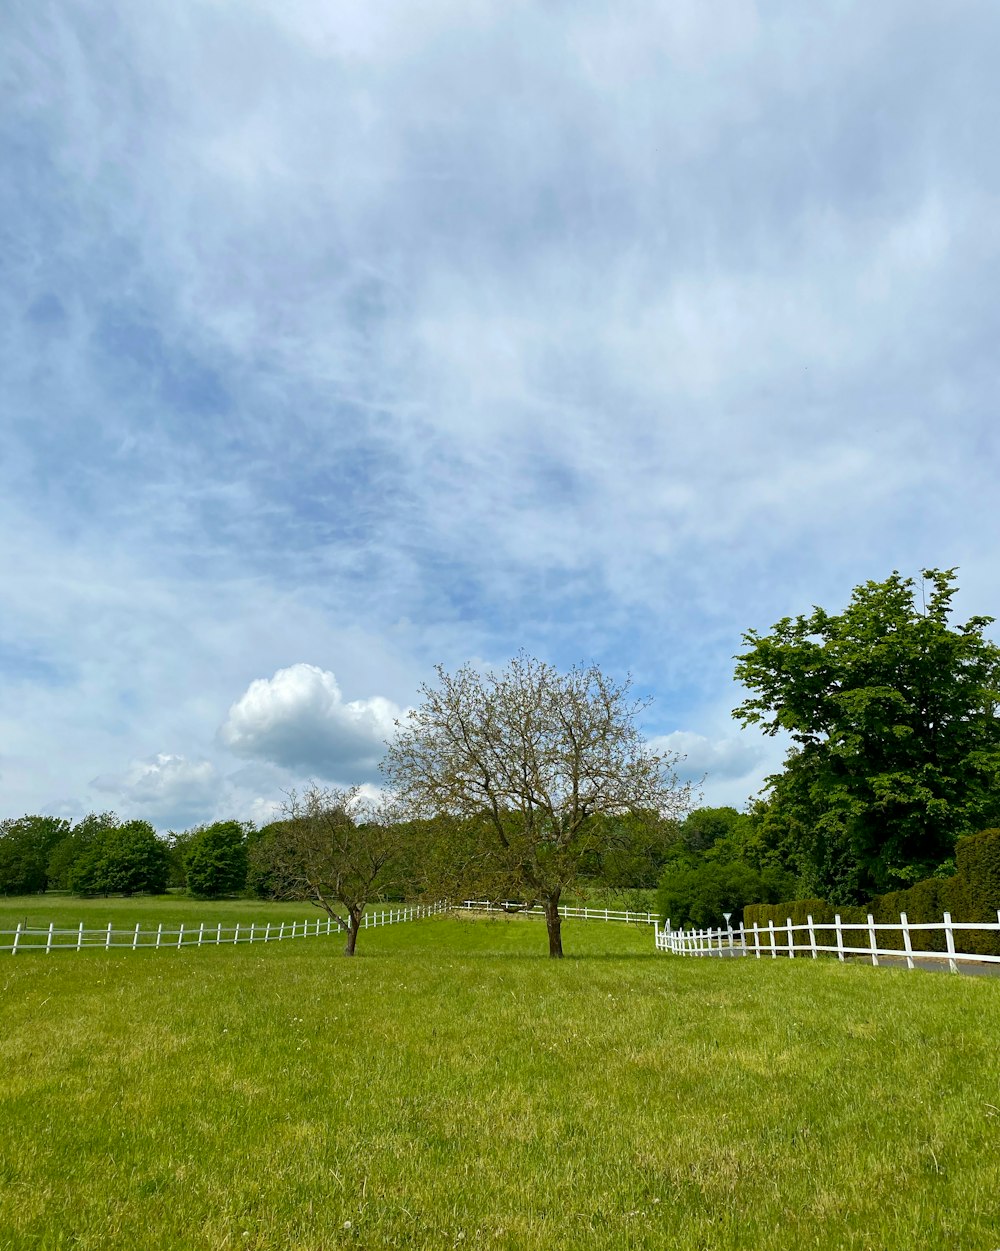 green grass field with trees under white clouds and blue sky during daytime